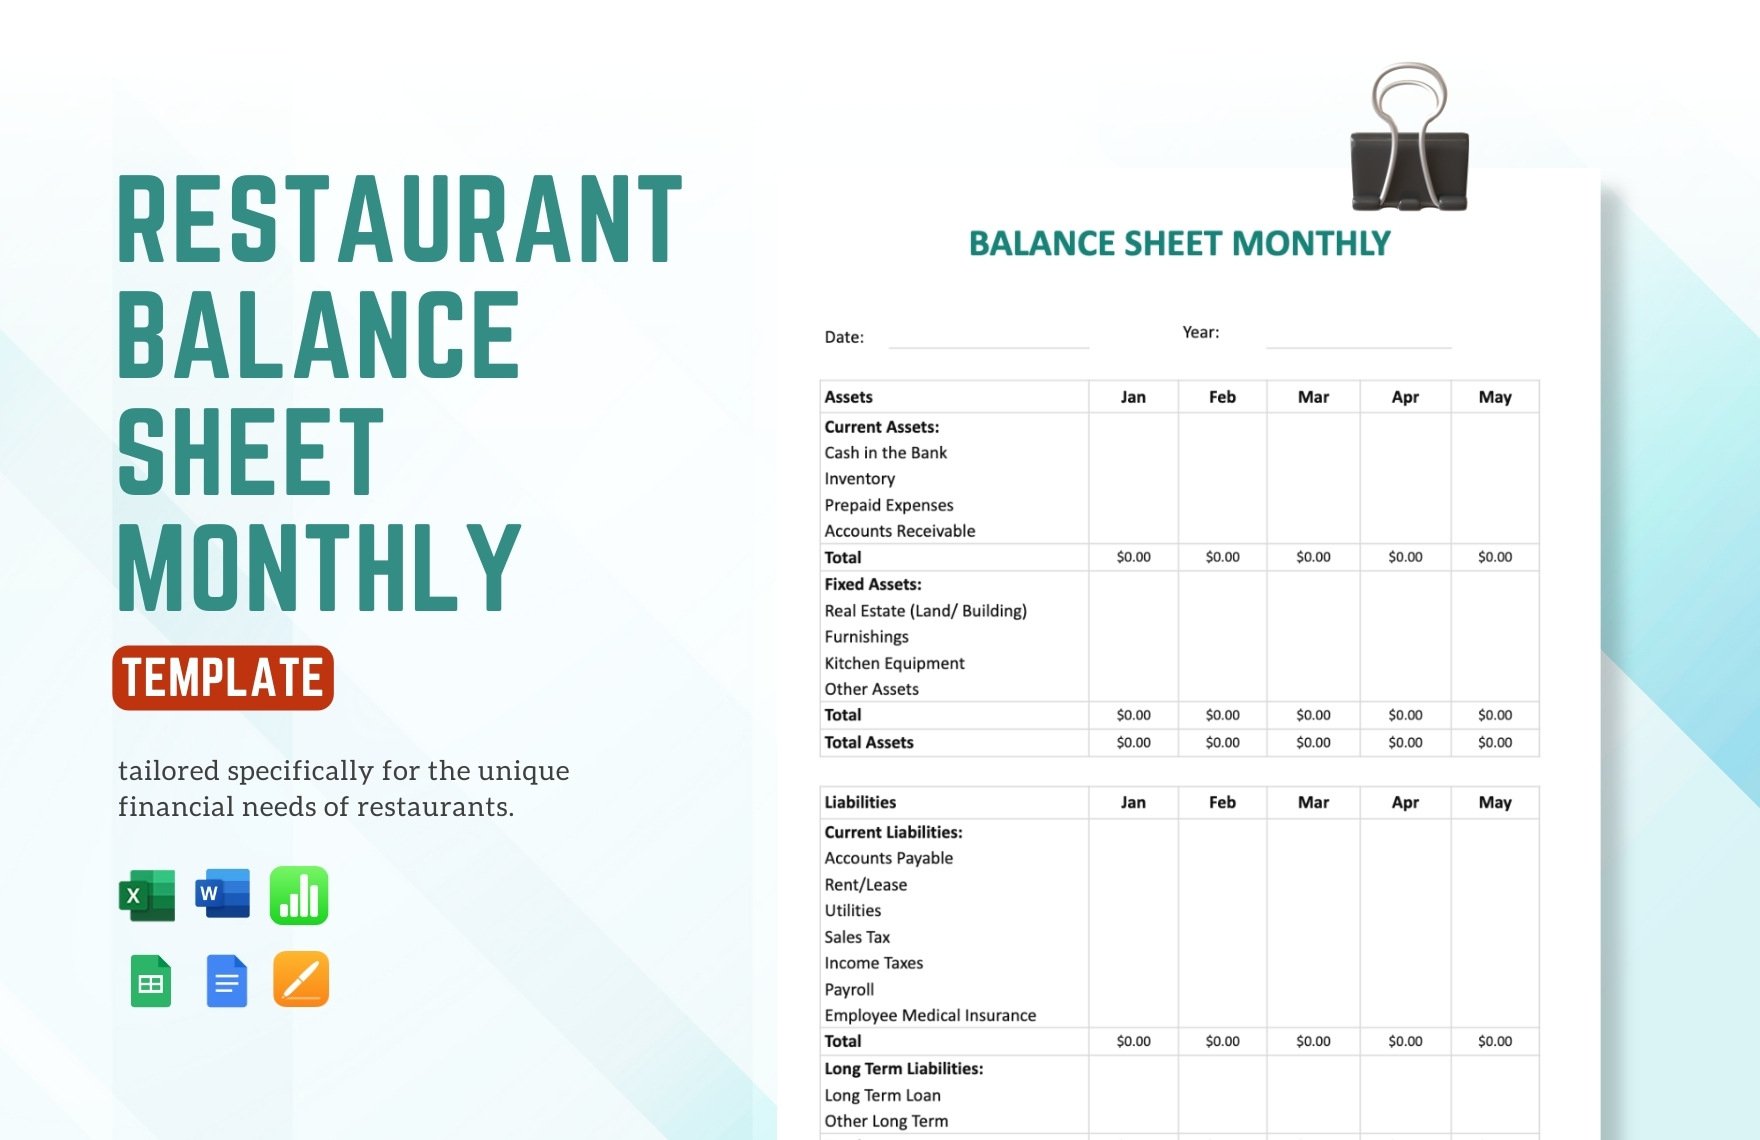 Restaurant Balance Sheet Monthly Template in Word, Google Docs, Excel, Google Sheets, Apple Pages, Apple Numbers